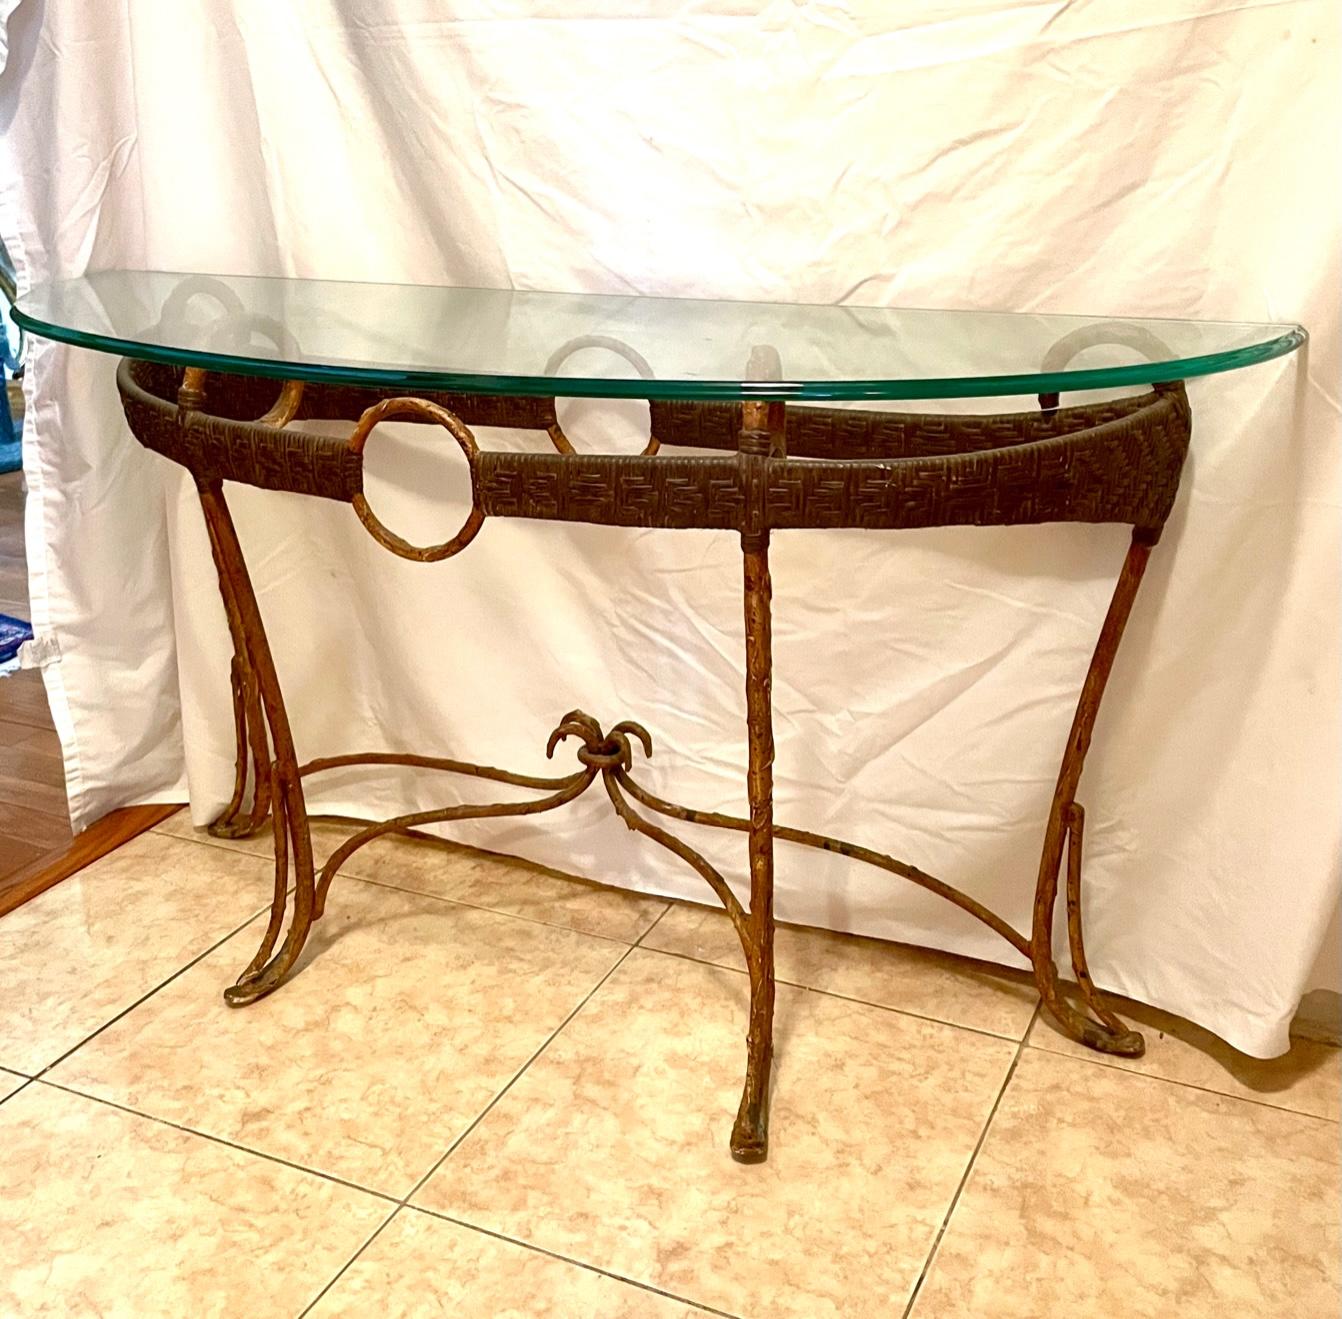 Hollywood Regency style faux bamboo iron rattan glass demi lune console table.

This stunning demi lune console table is stylishly created with circular rattan banding in iron with faux bamboo finish. It’s demi lune shape supports a considerable